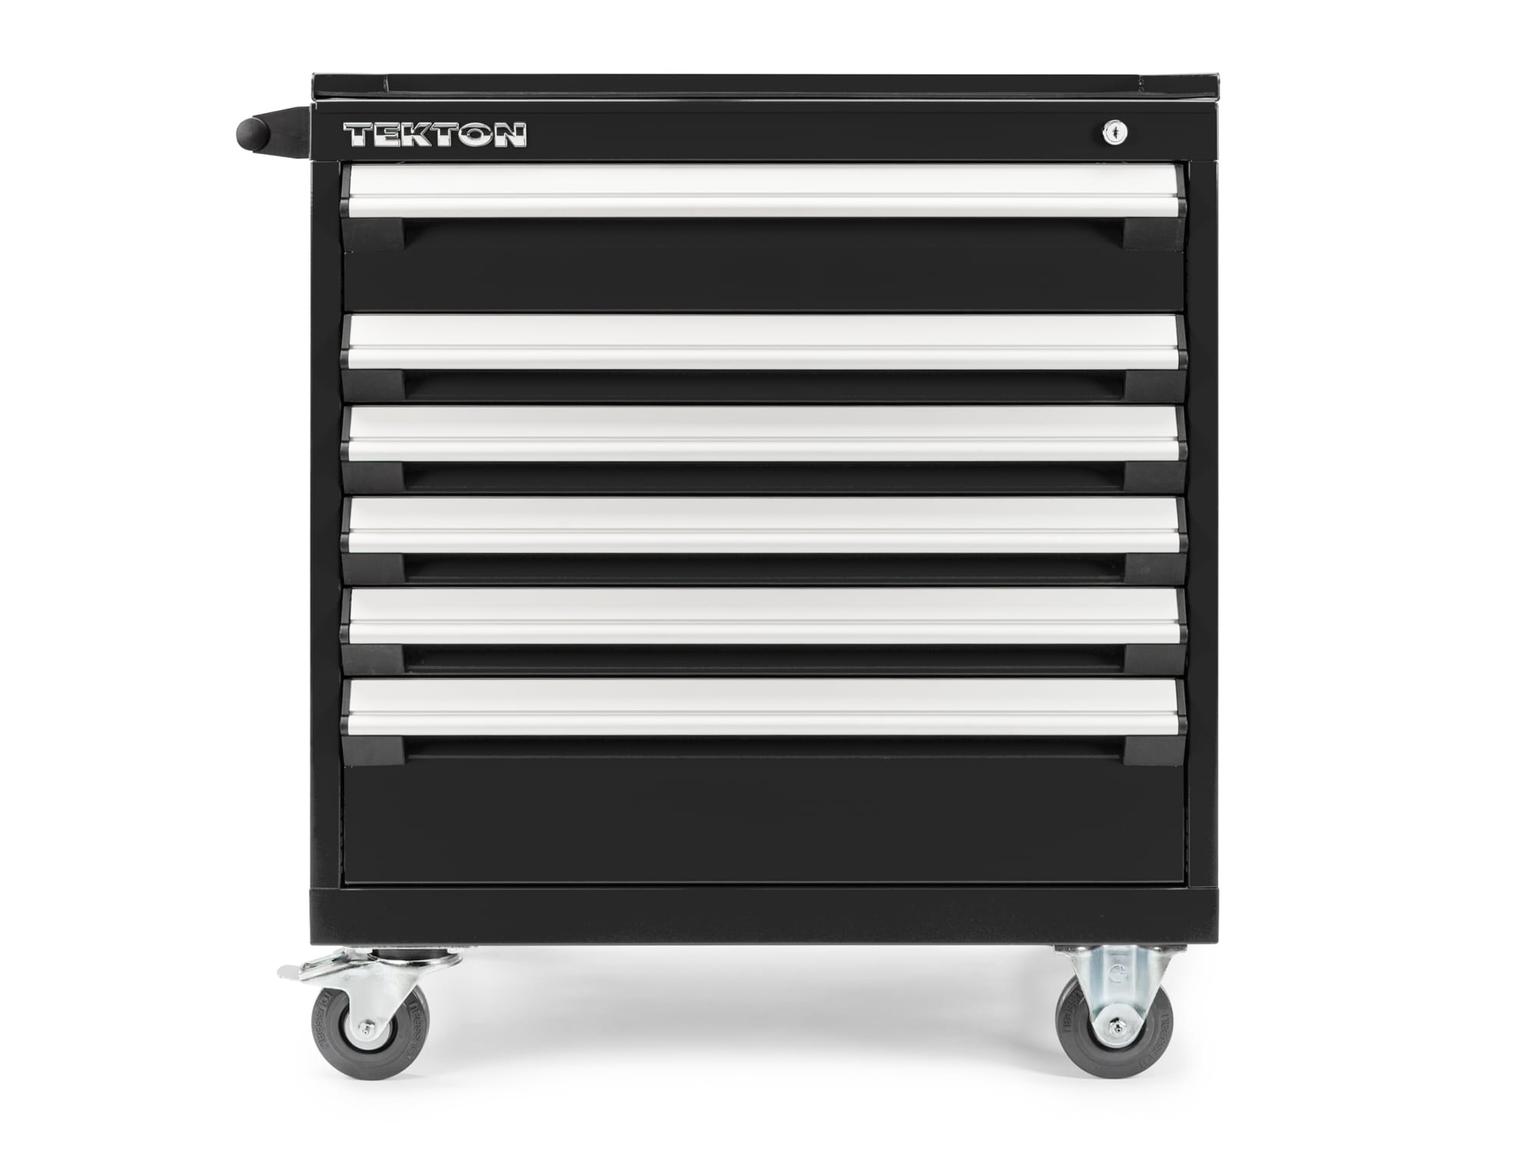 TEKTON ORG71100-T 30 Inch Wide 6-Drawer Tool Cabinet, Carbon (30" W x 34.25" H x 24" D)